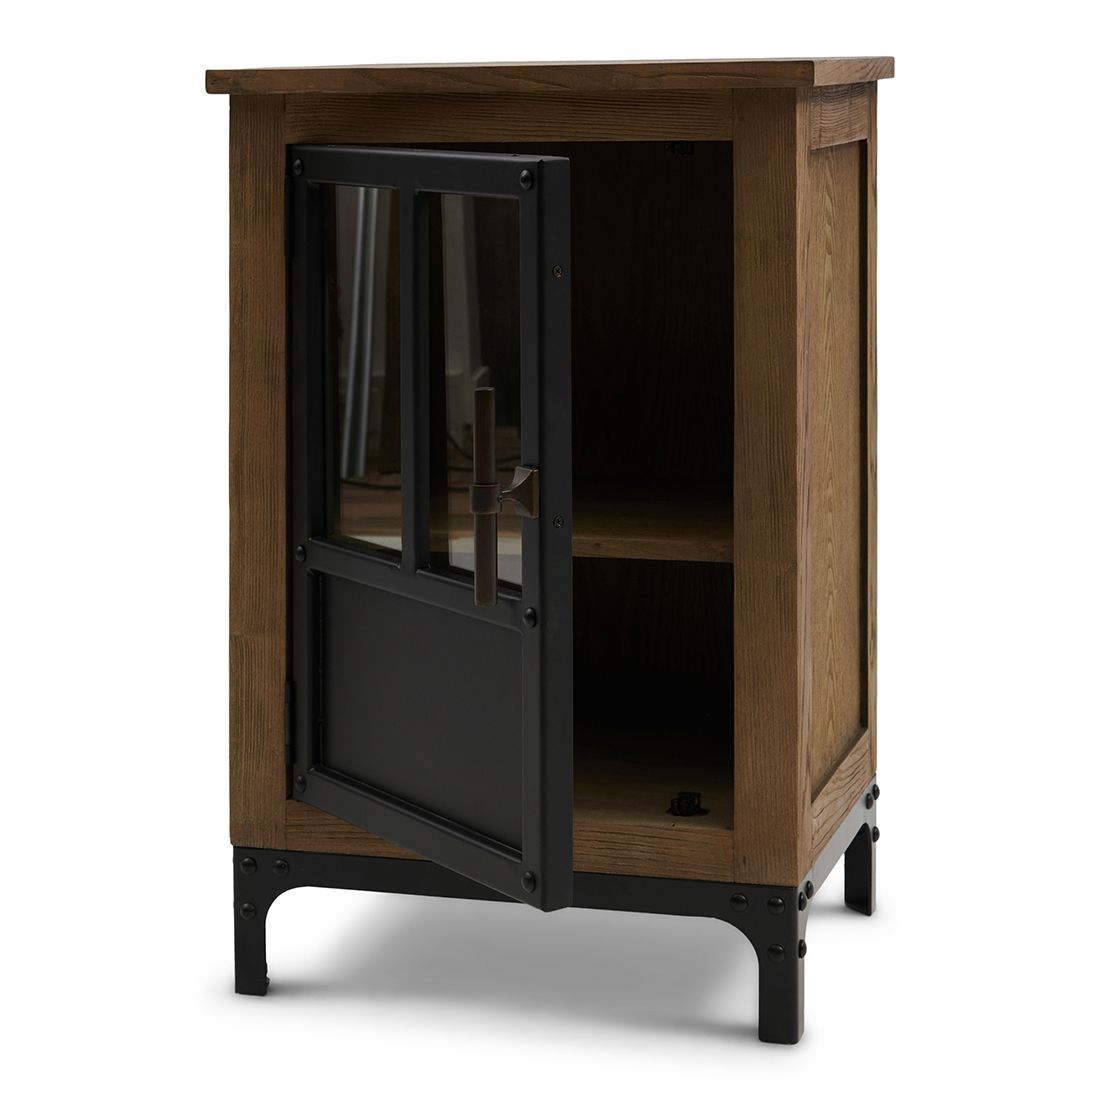 The Hoxton Bed Cabinet Right